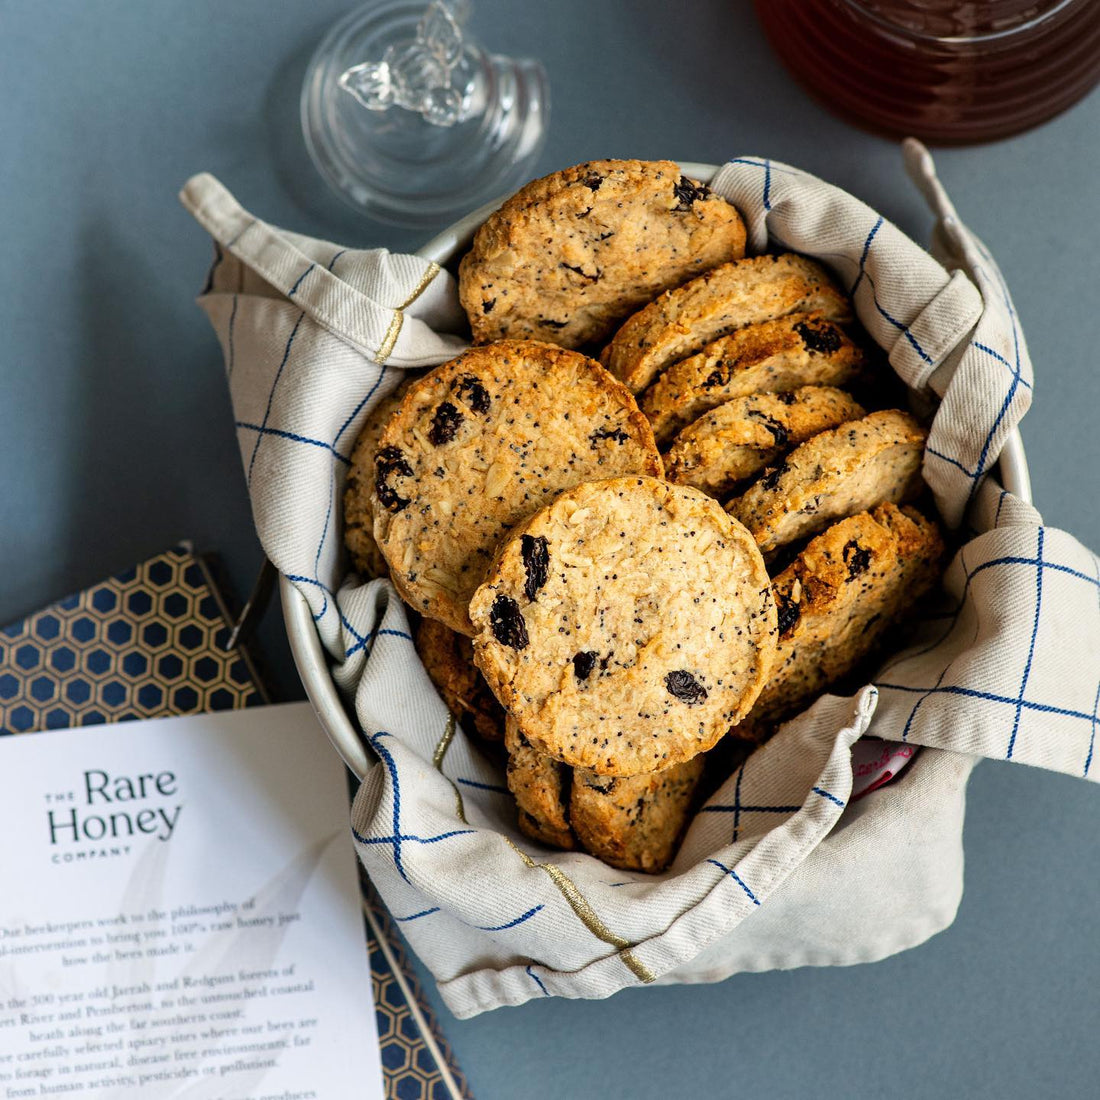 Honey, coconut and oat biscuits